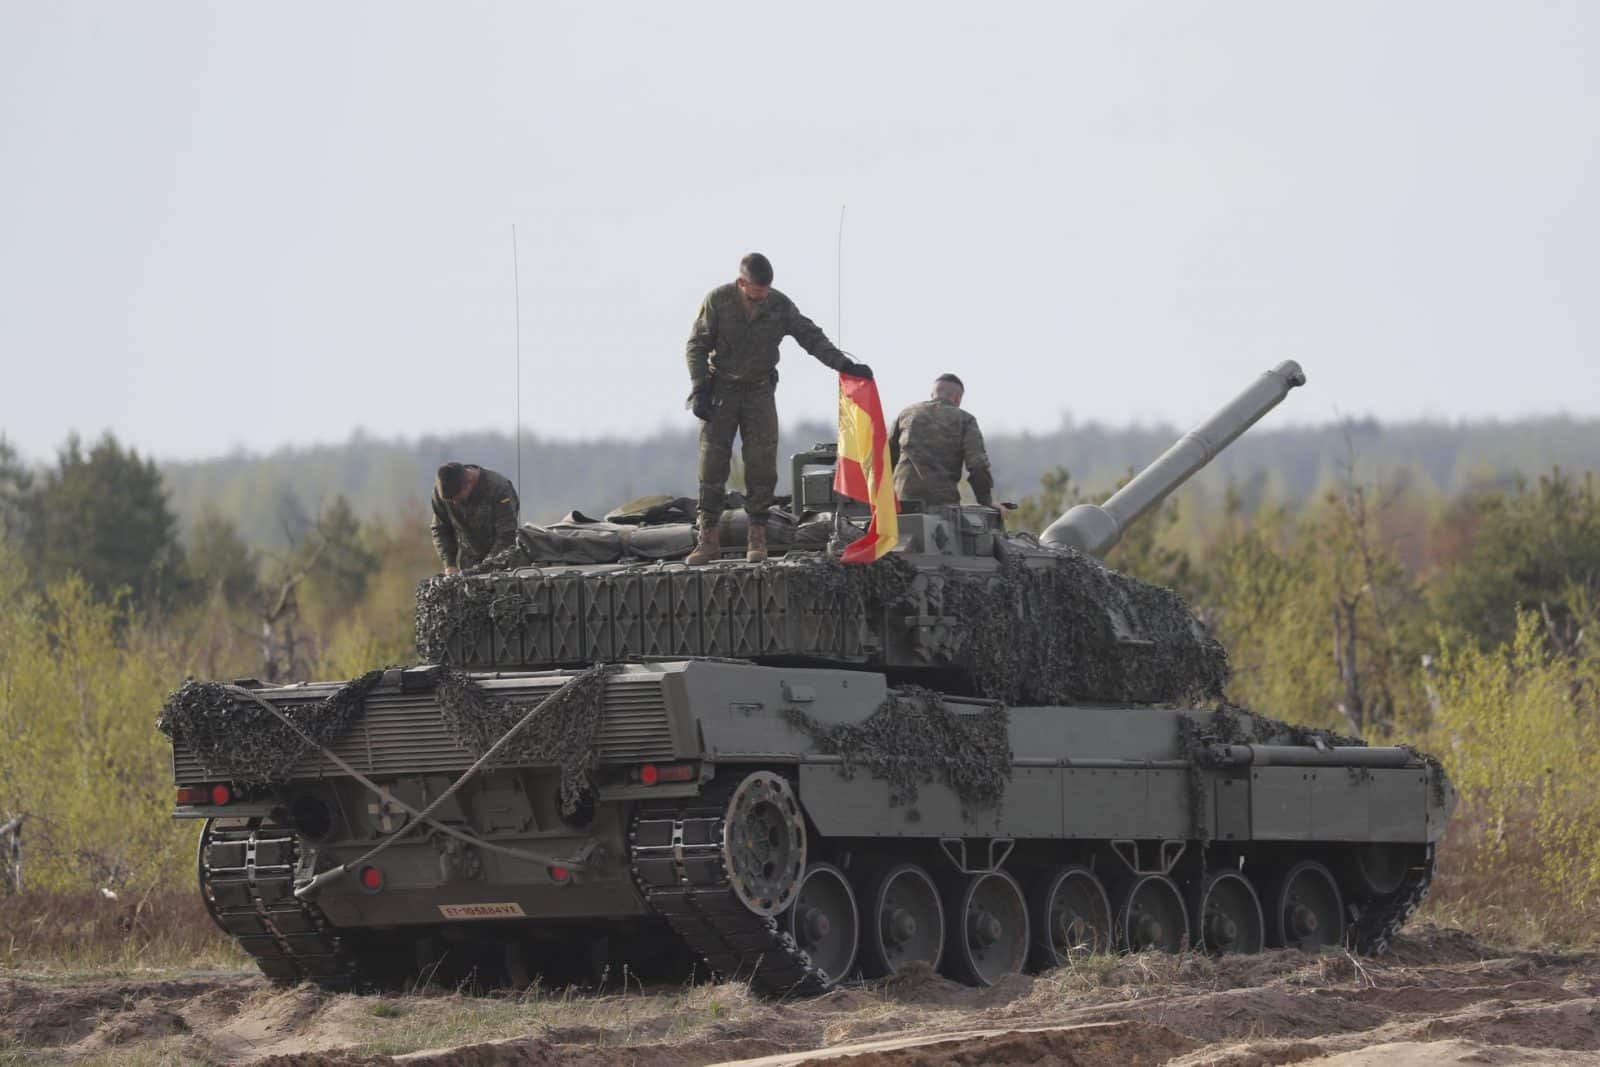 Spain will provide Ukraine with up to 10 Leopard tanks